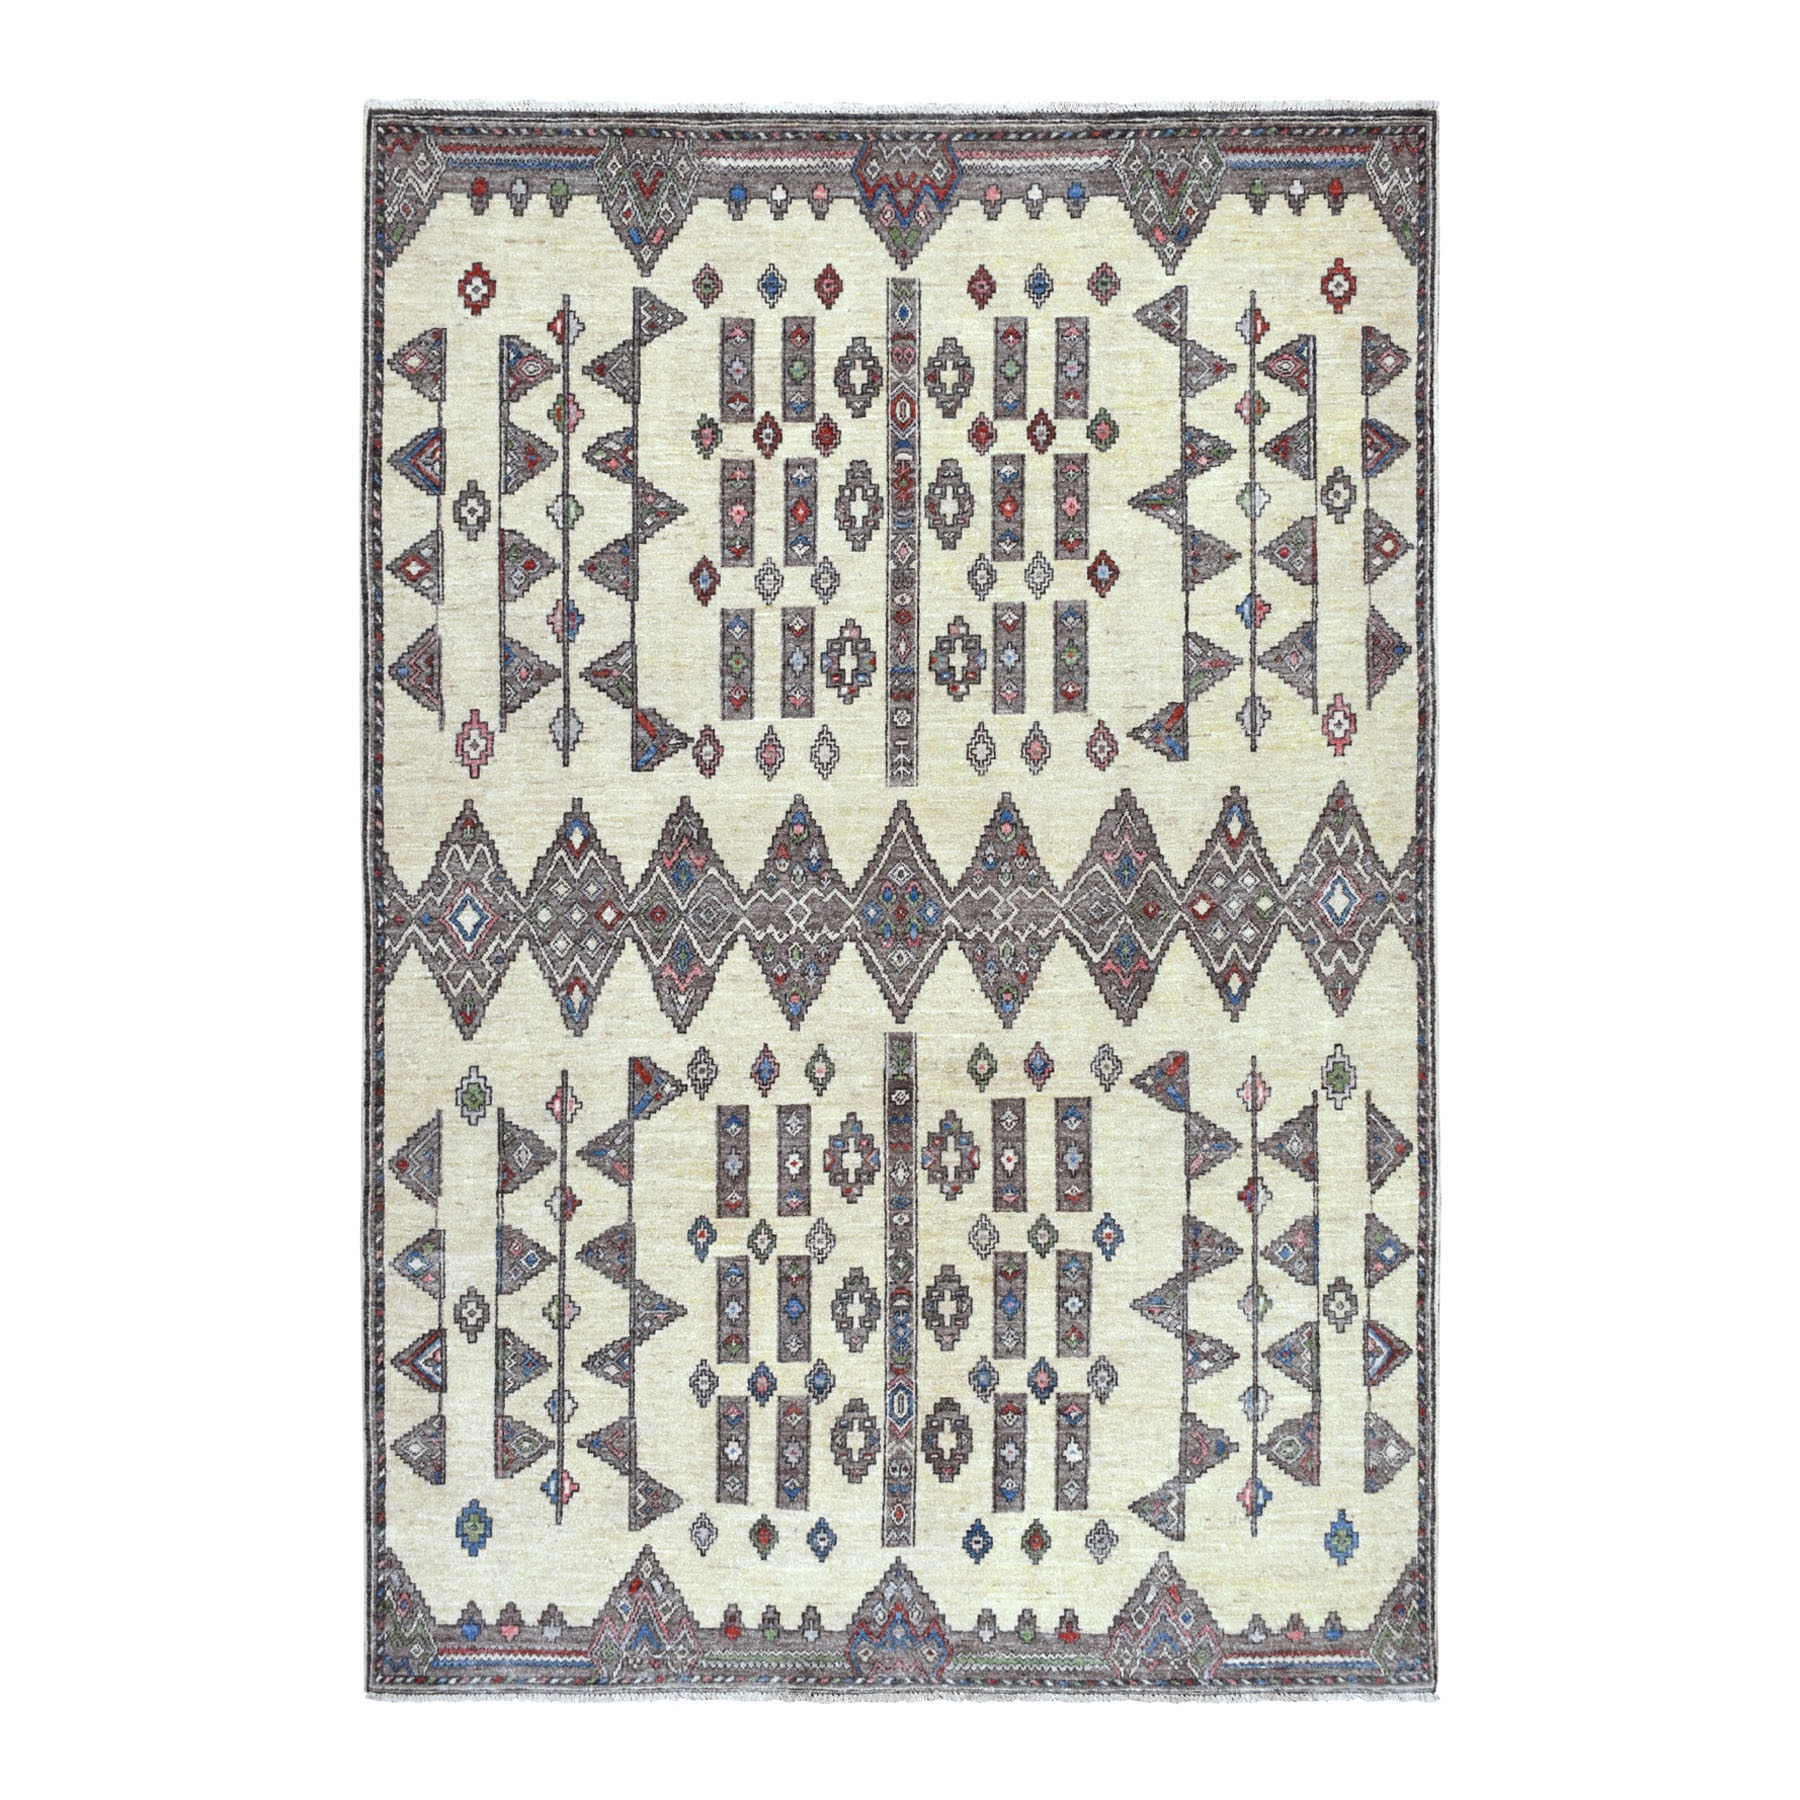 6'X9' Ivory Peshawar With Berber Motifs Inspired With Pop Of Color Pure Wool Oriental Rug moaedba0